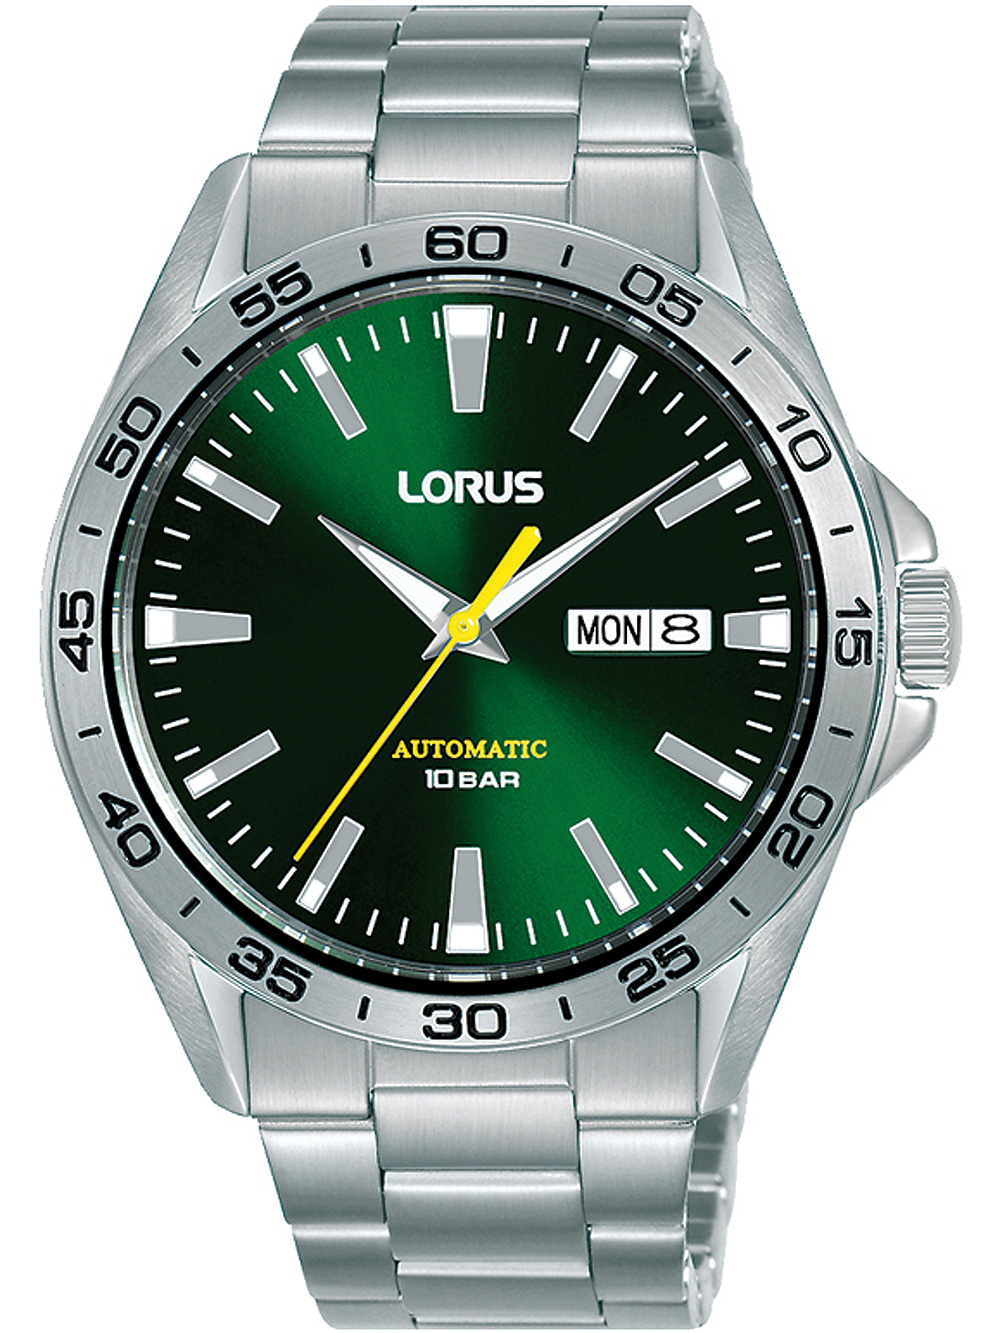 & buy LORUS watches: postage free cheap, secure!